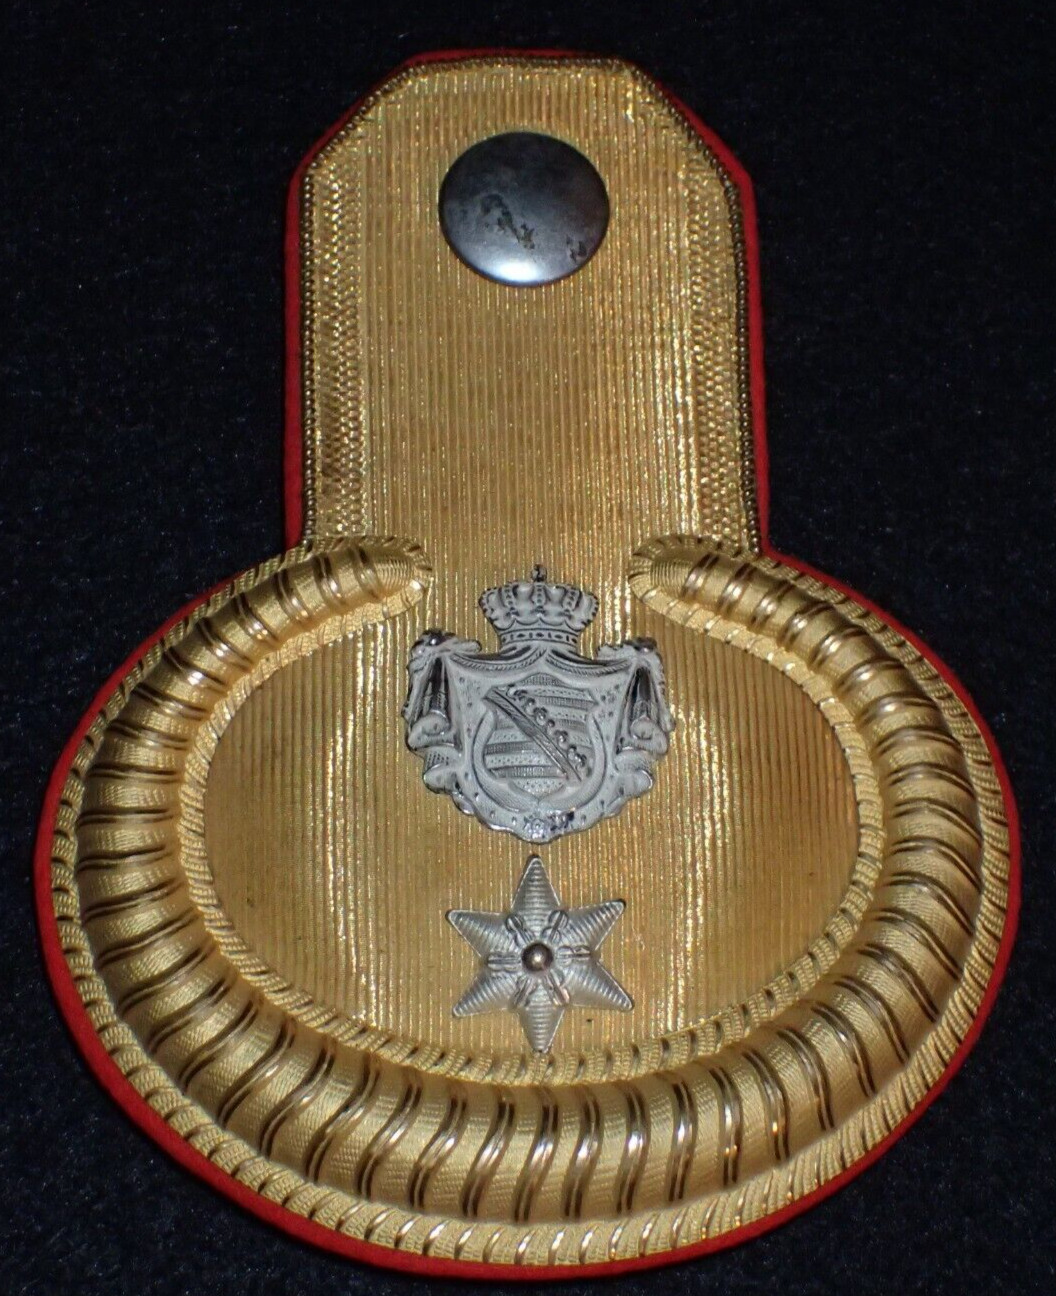 WWI Imperial German Army Officers Officials Shoulder Epaulette Saxony Crest Rare